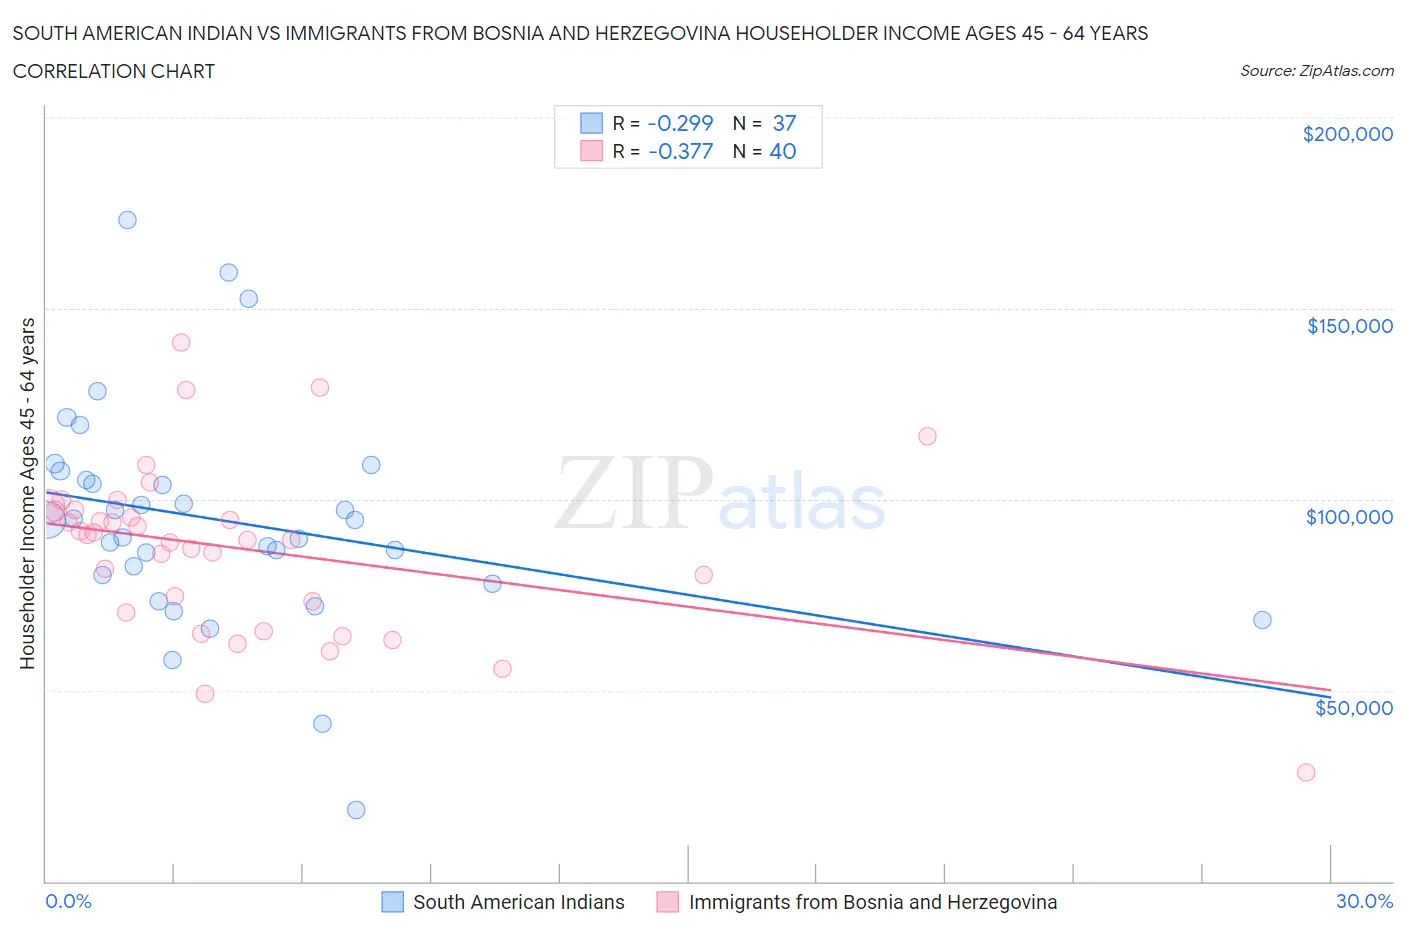 South American Indian vs Immigrants from Bosnia and Herzegovina Householder Income Ages 45 - 64 years